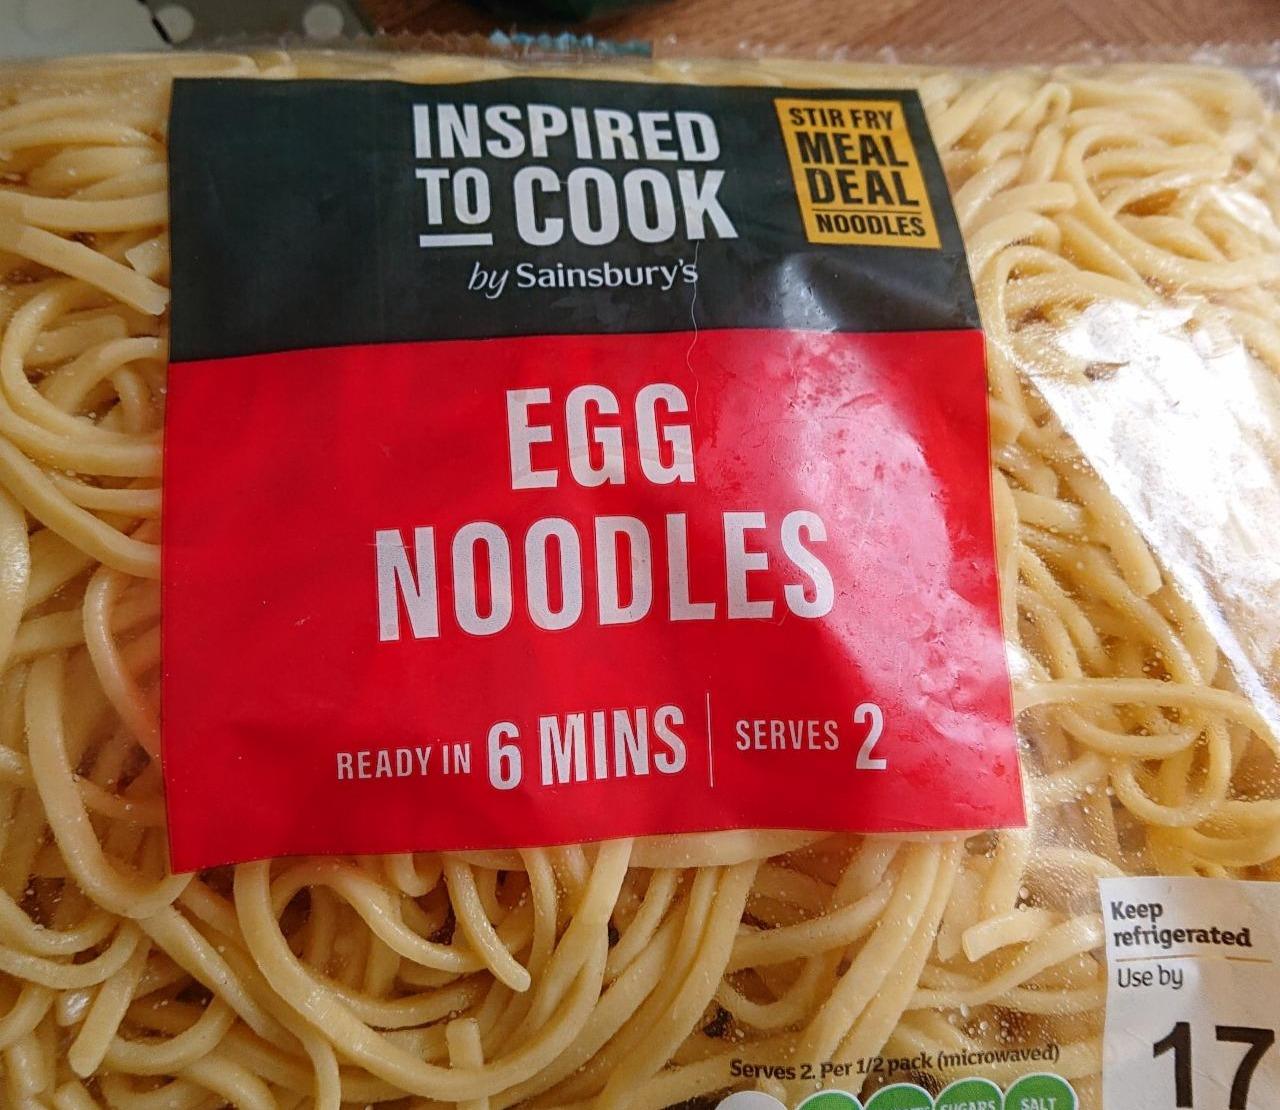 Fotografie - Inspired to Cook Egg Noodles by Sainsbury's